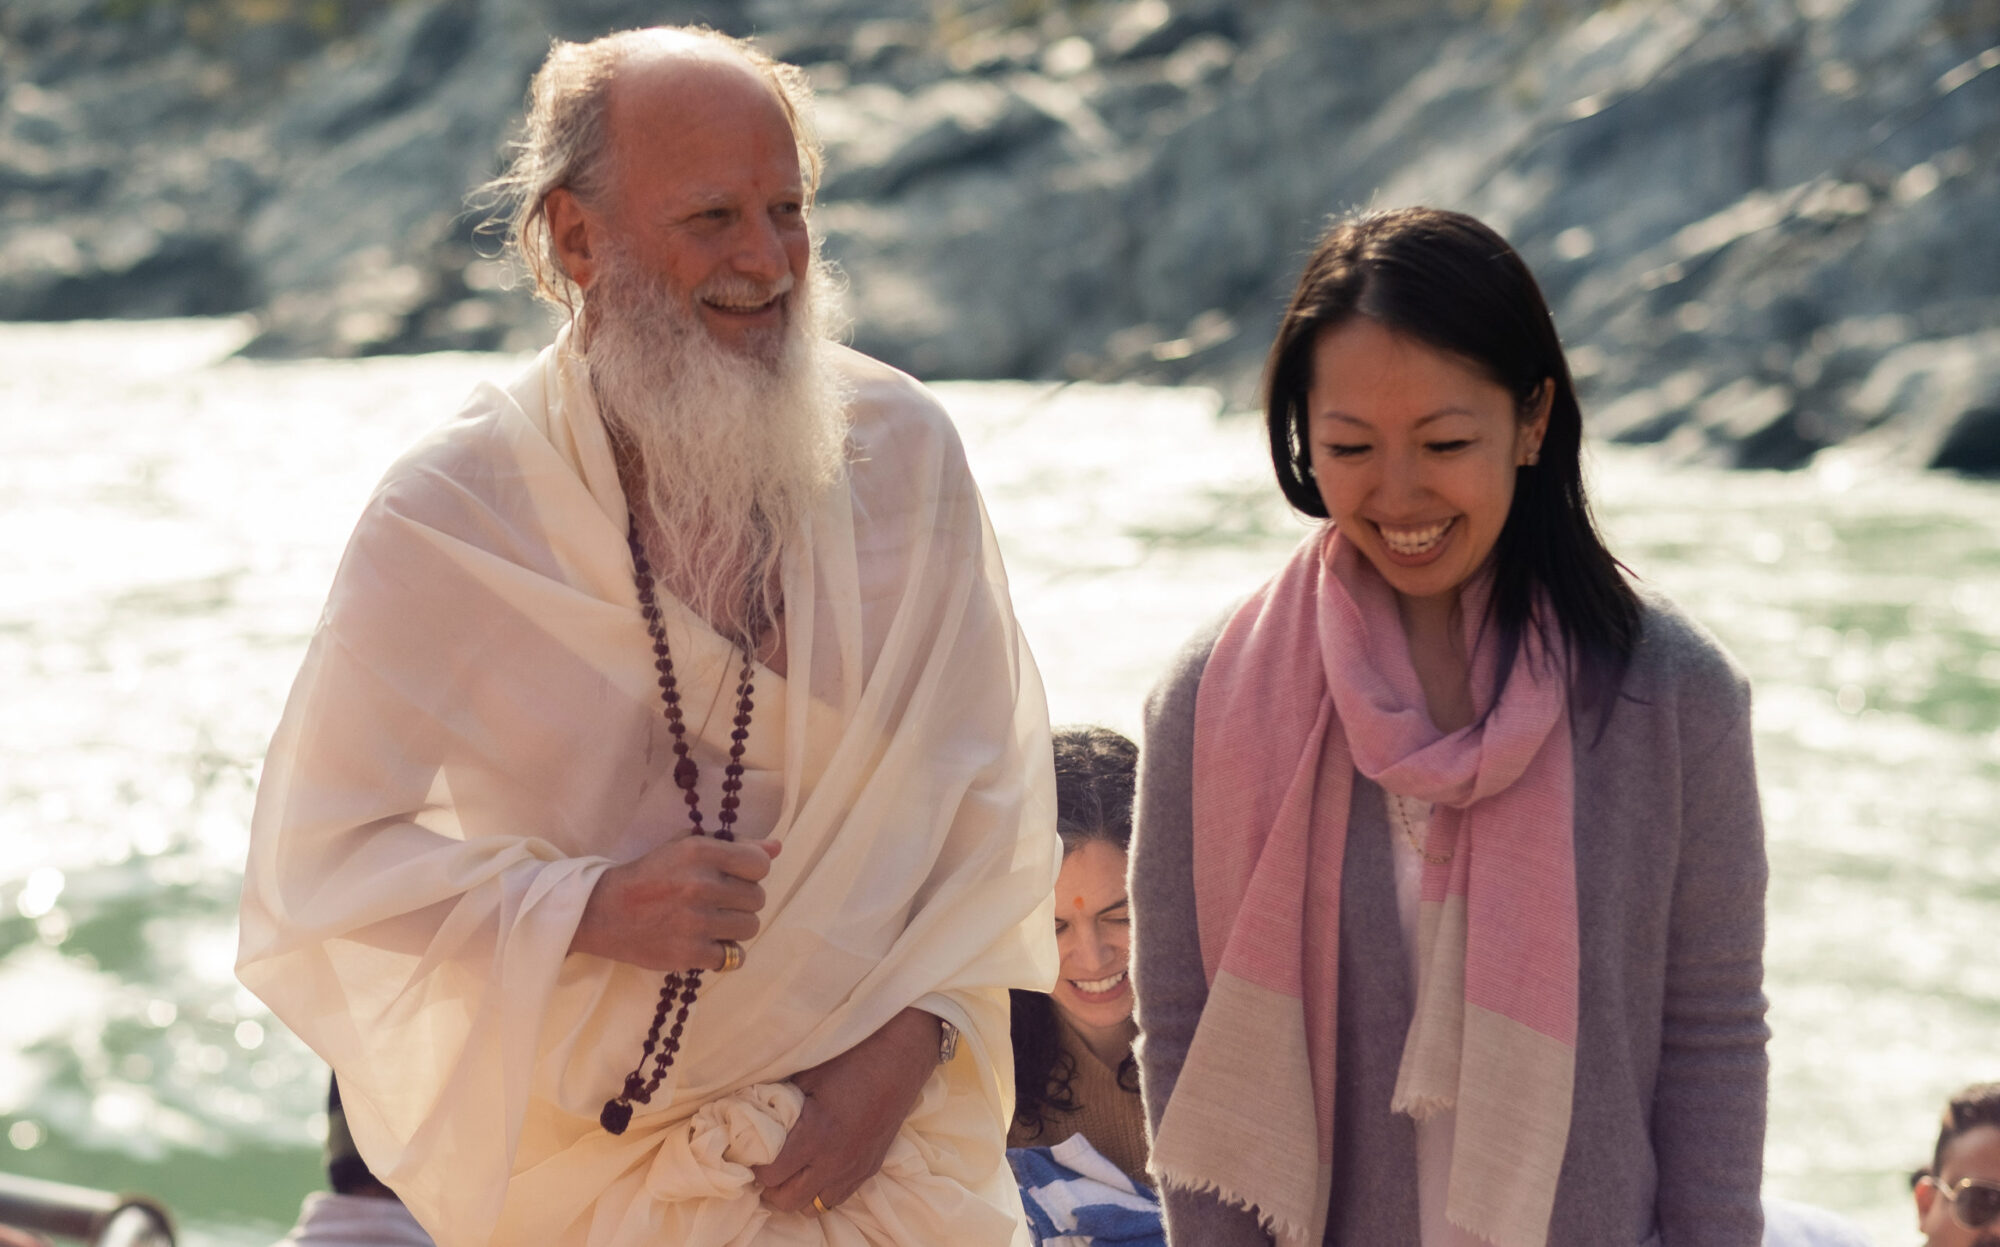 Thom Knoles discussing advanced meditation with a practitioner